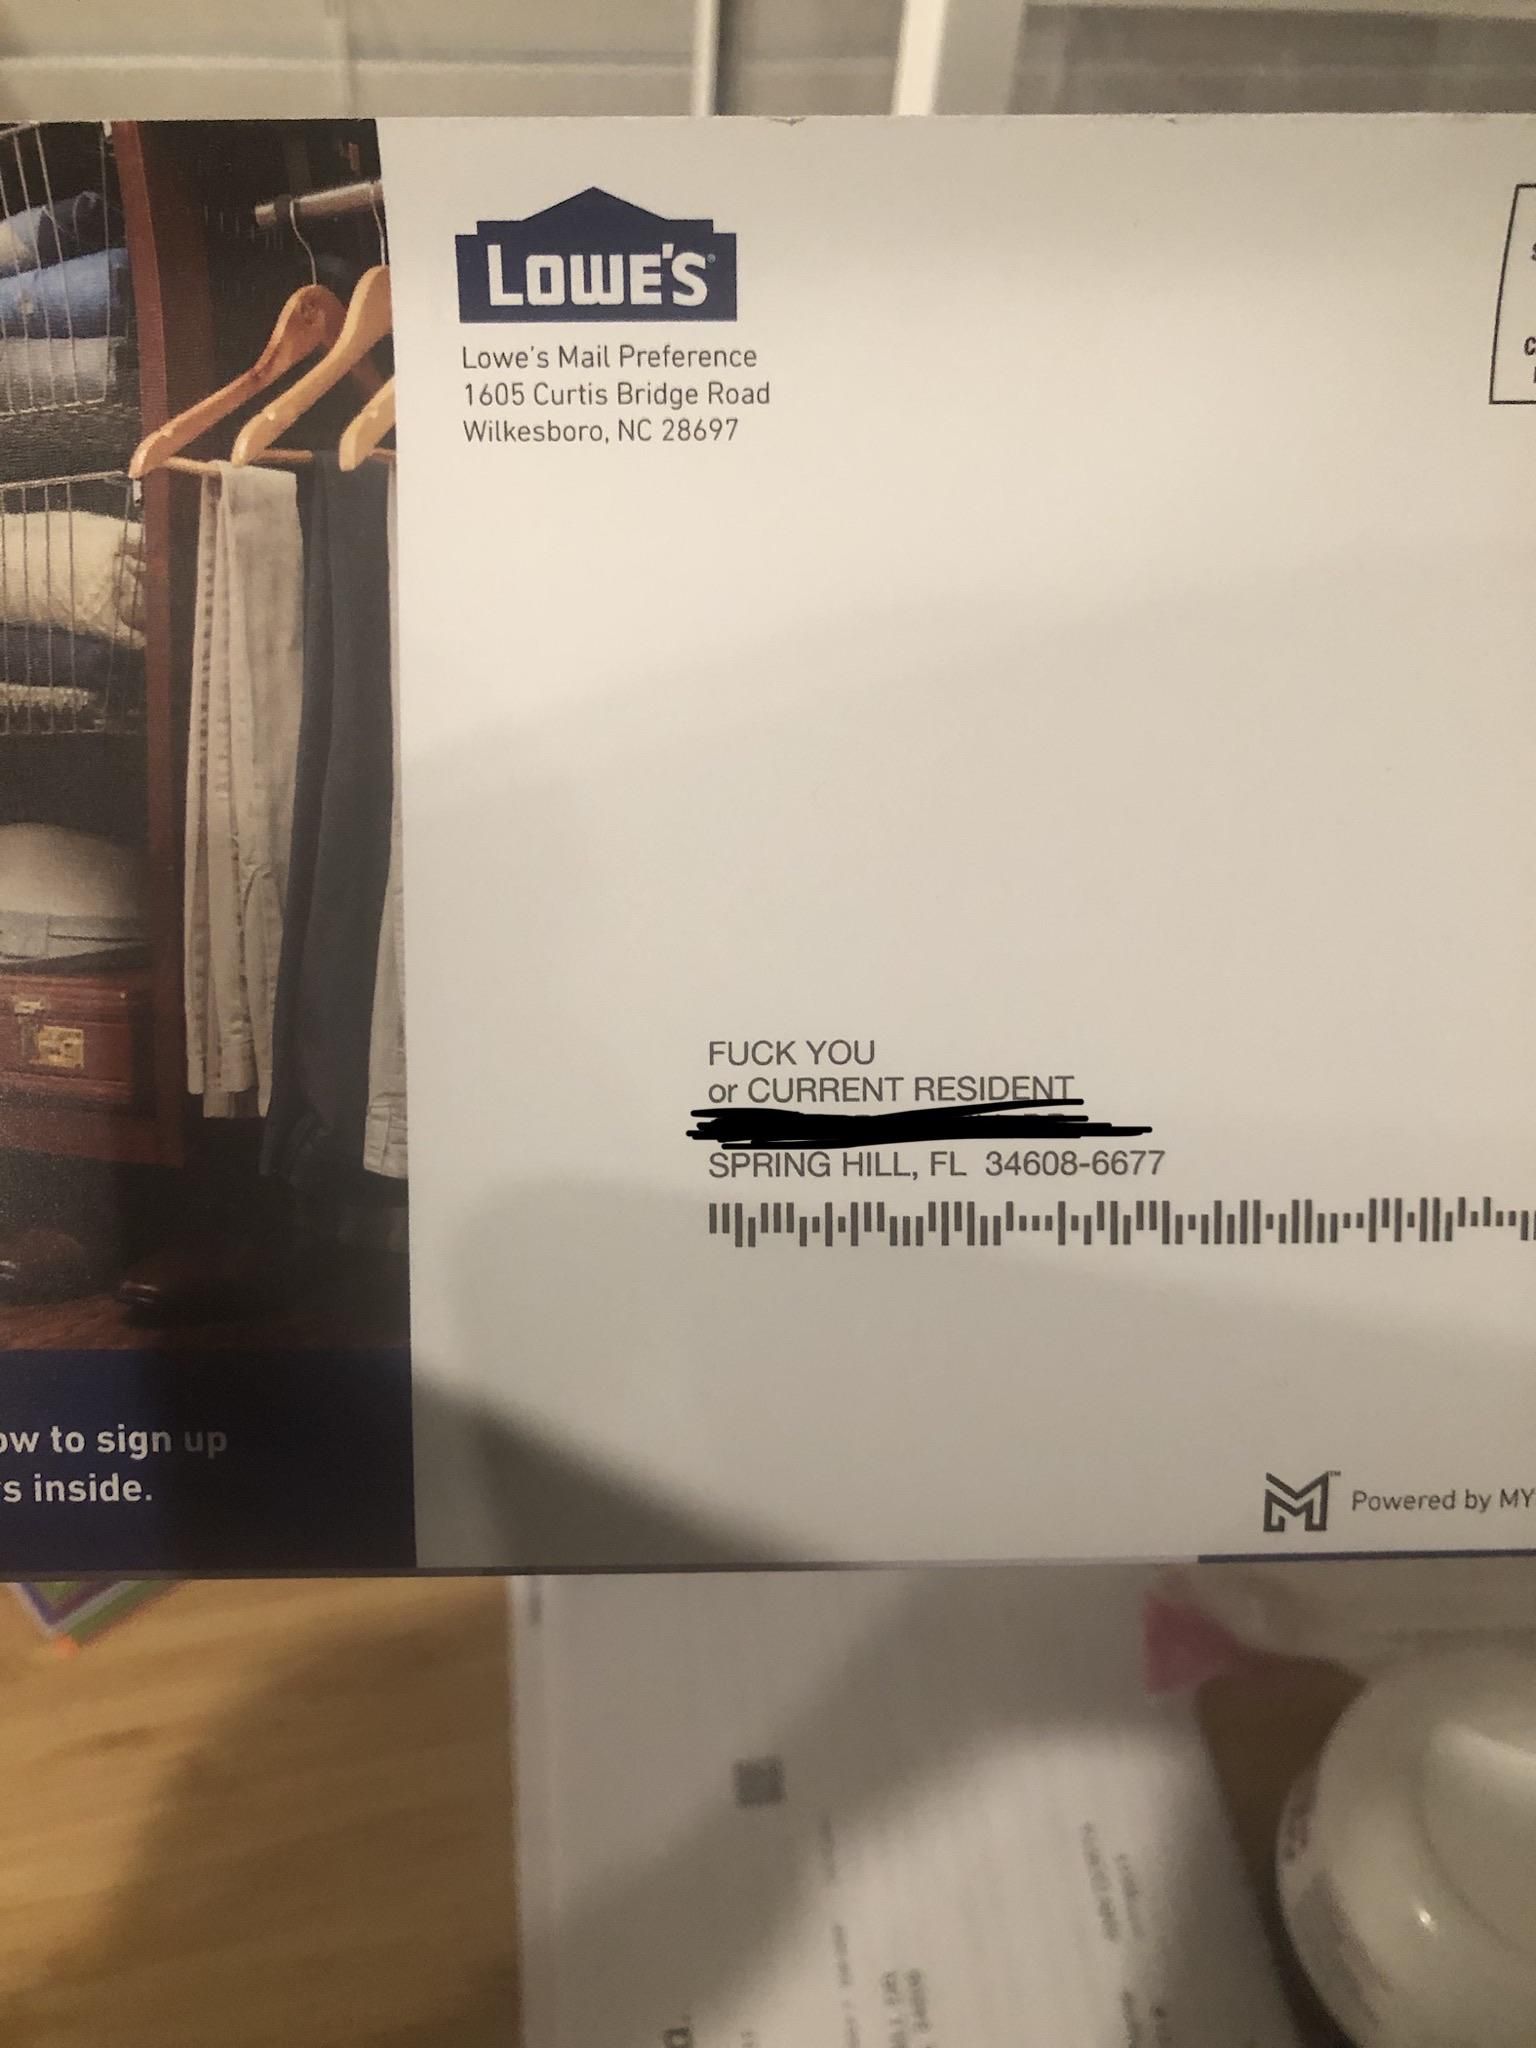 You know what Lowe’s? You’re lucky I’m not Karen